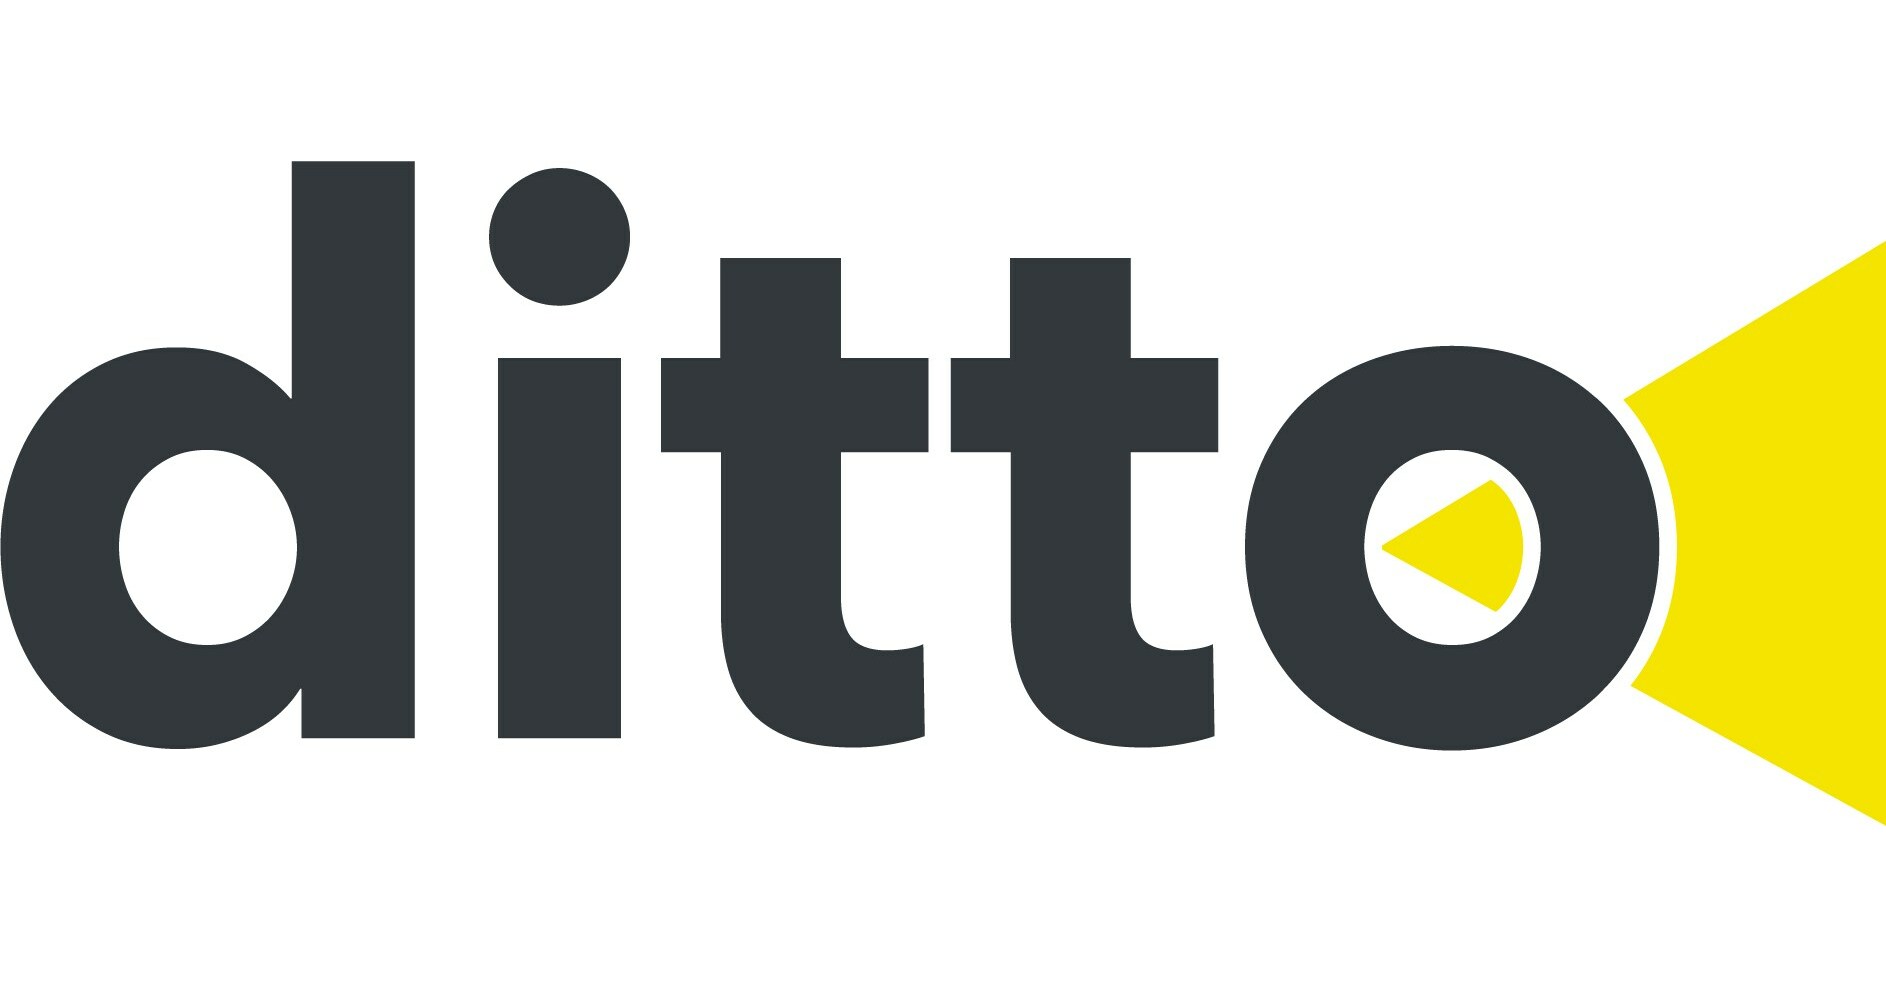 Ditto Music Jobs & Careers. 1 closed job